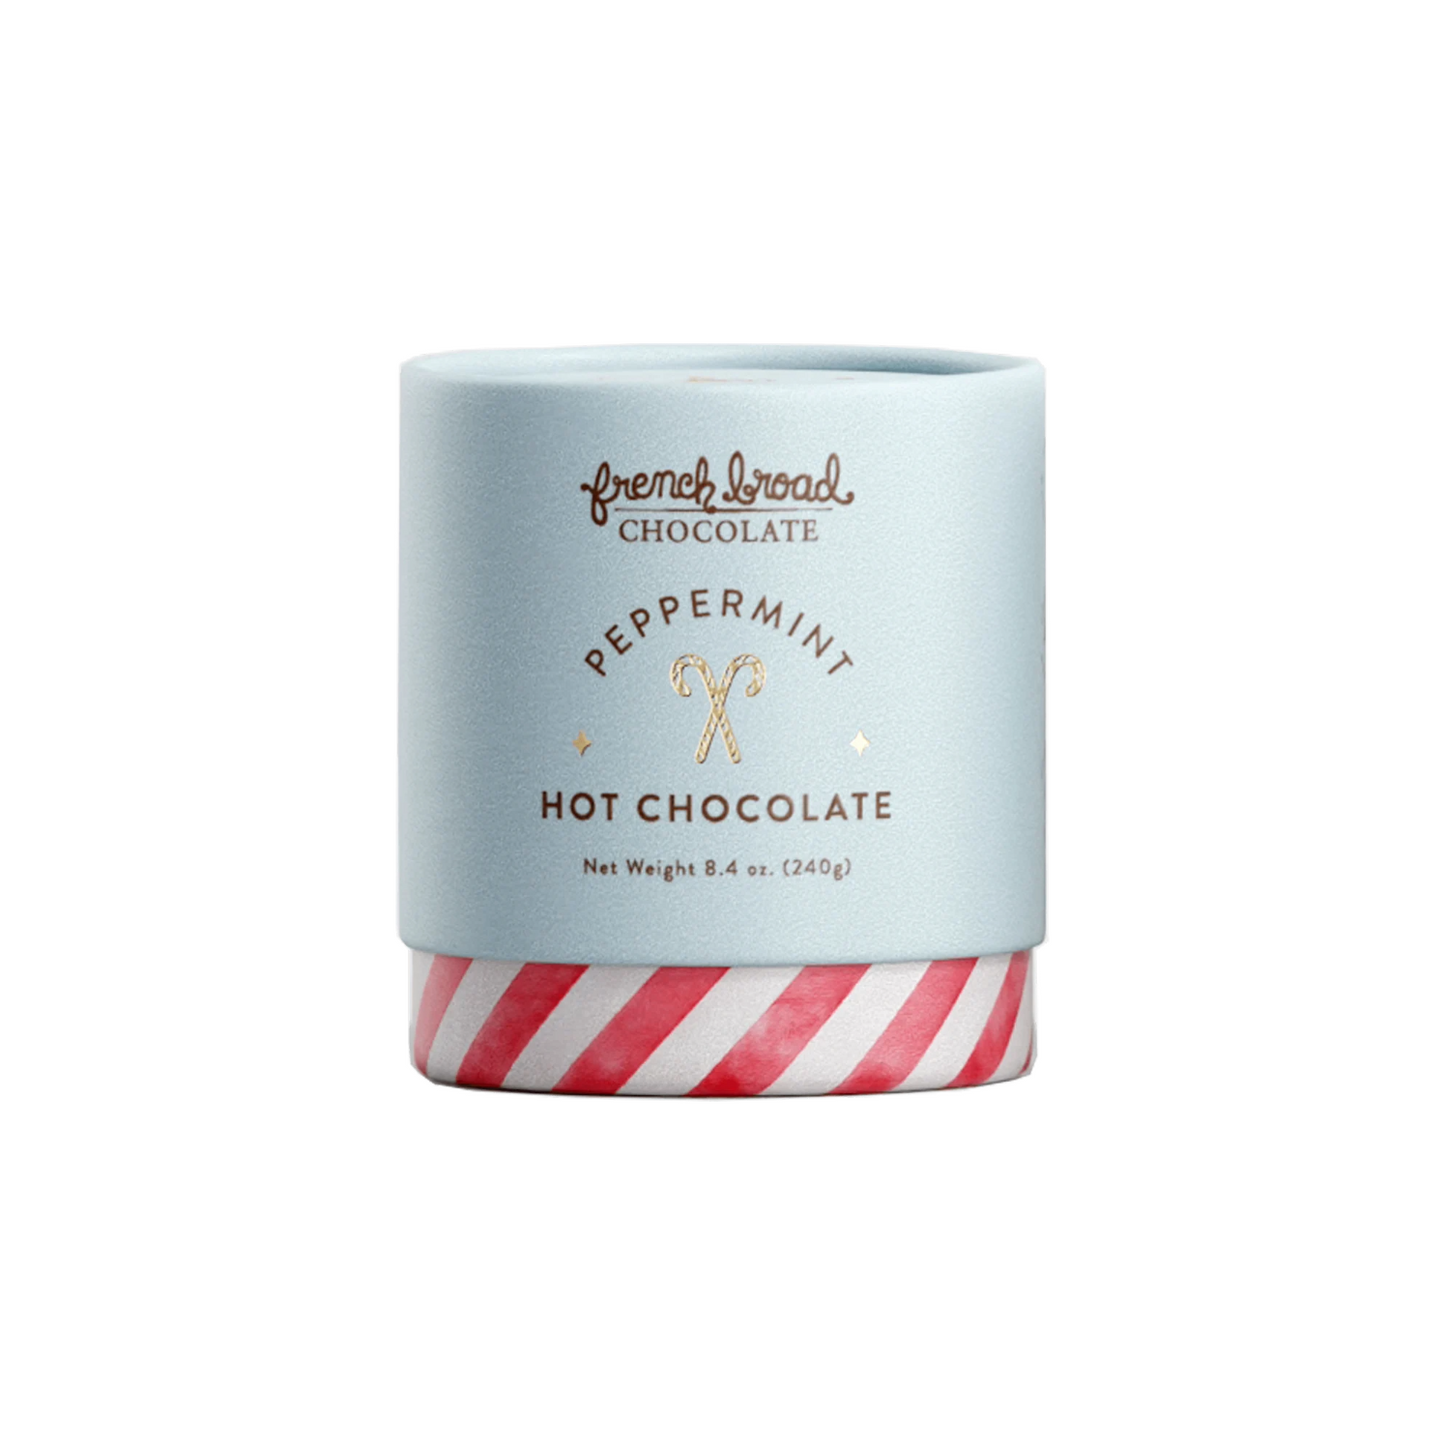 Peppermint Hot Chocolate by French Broad Chocolate